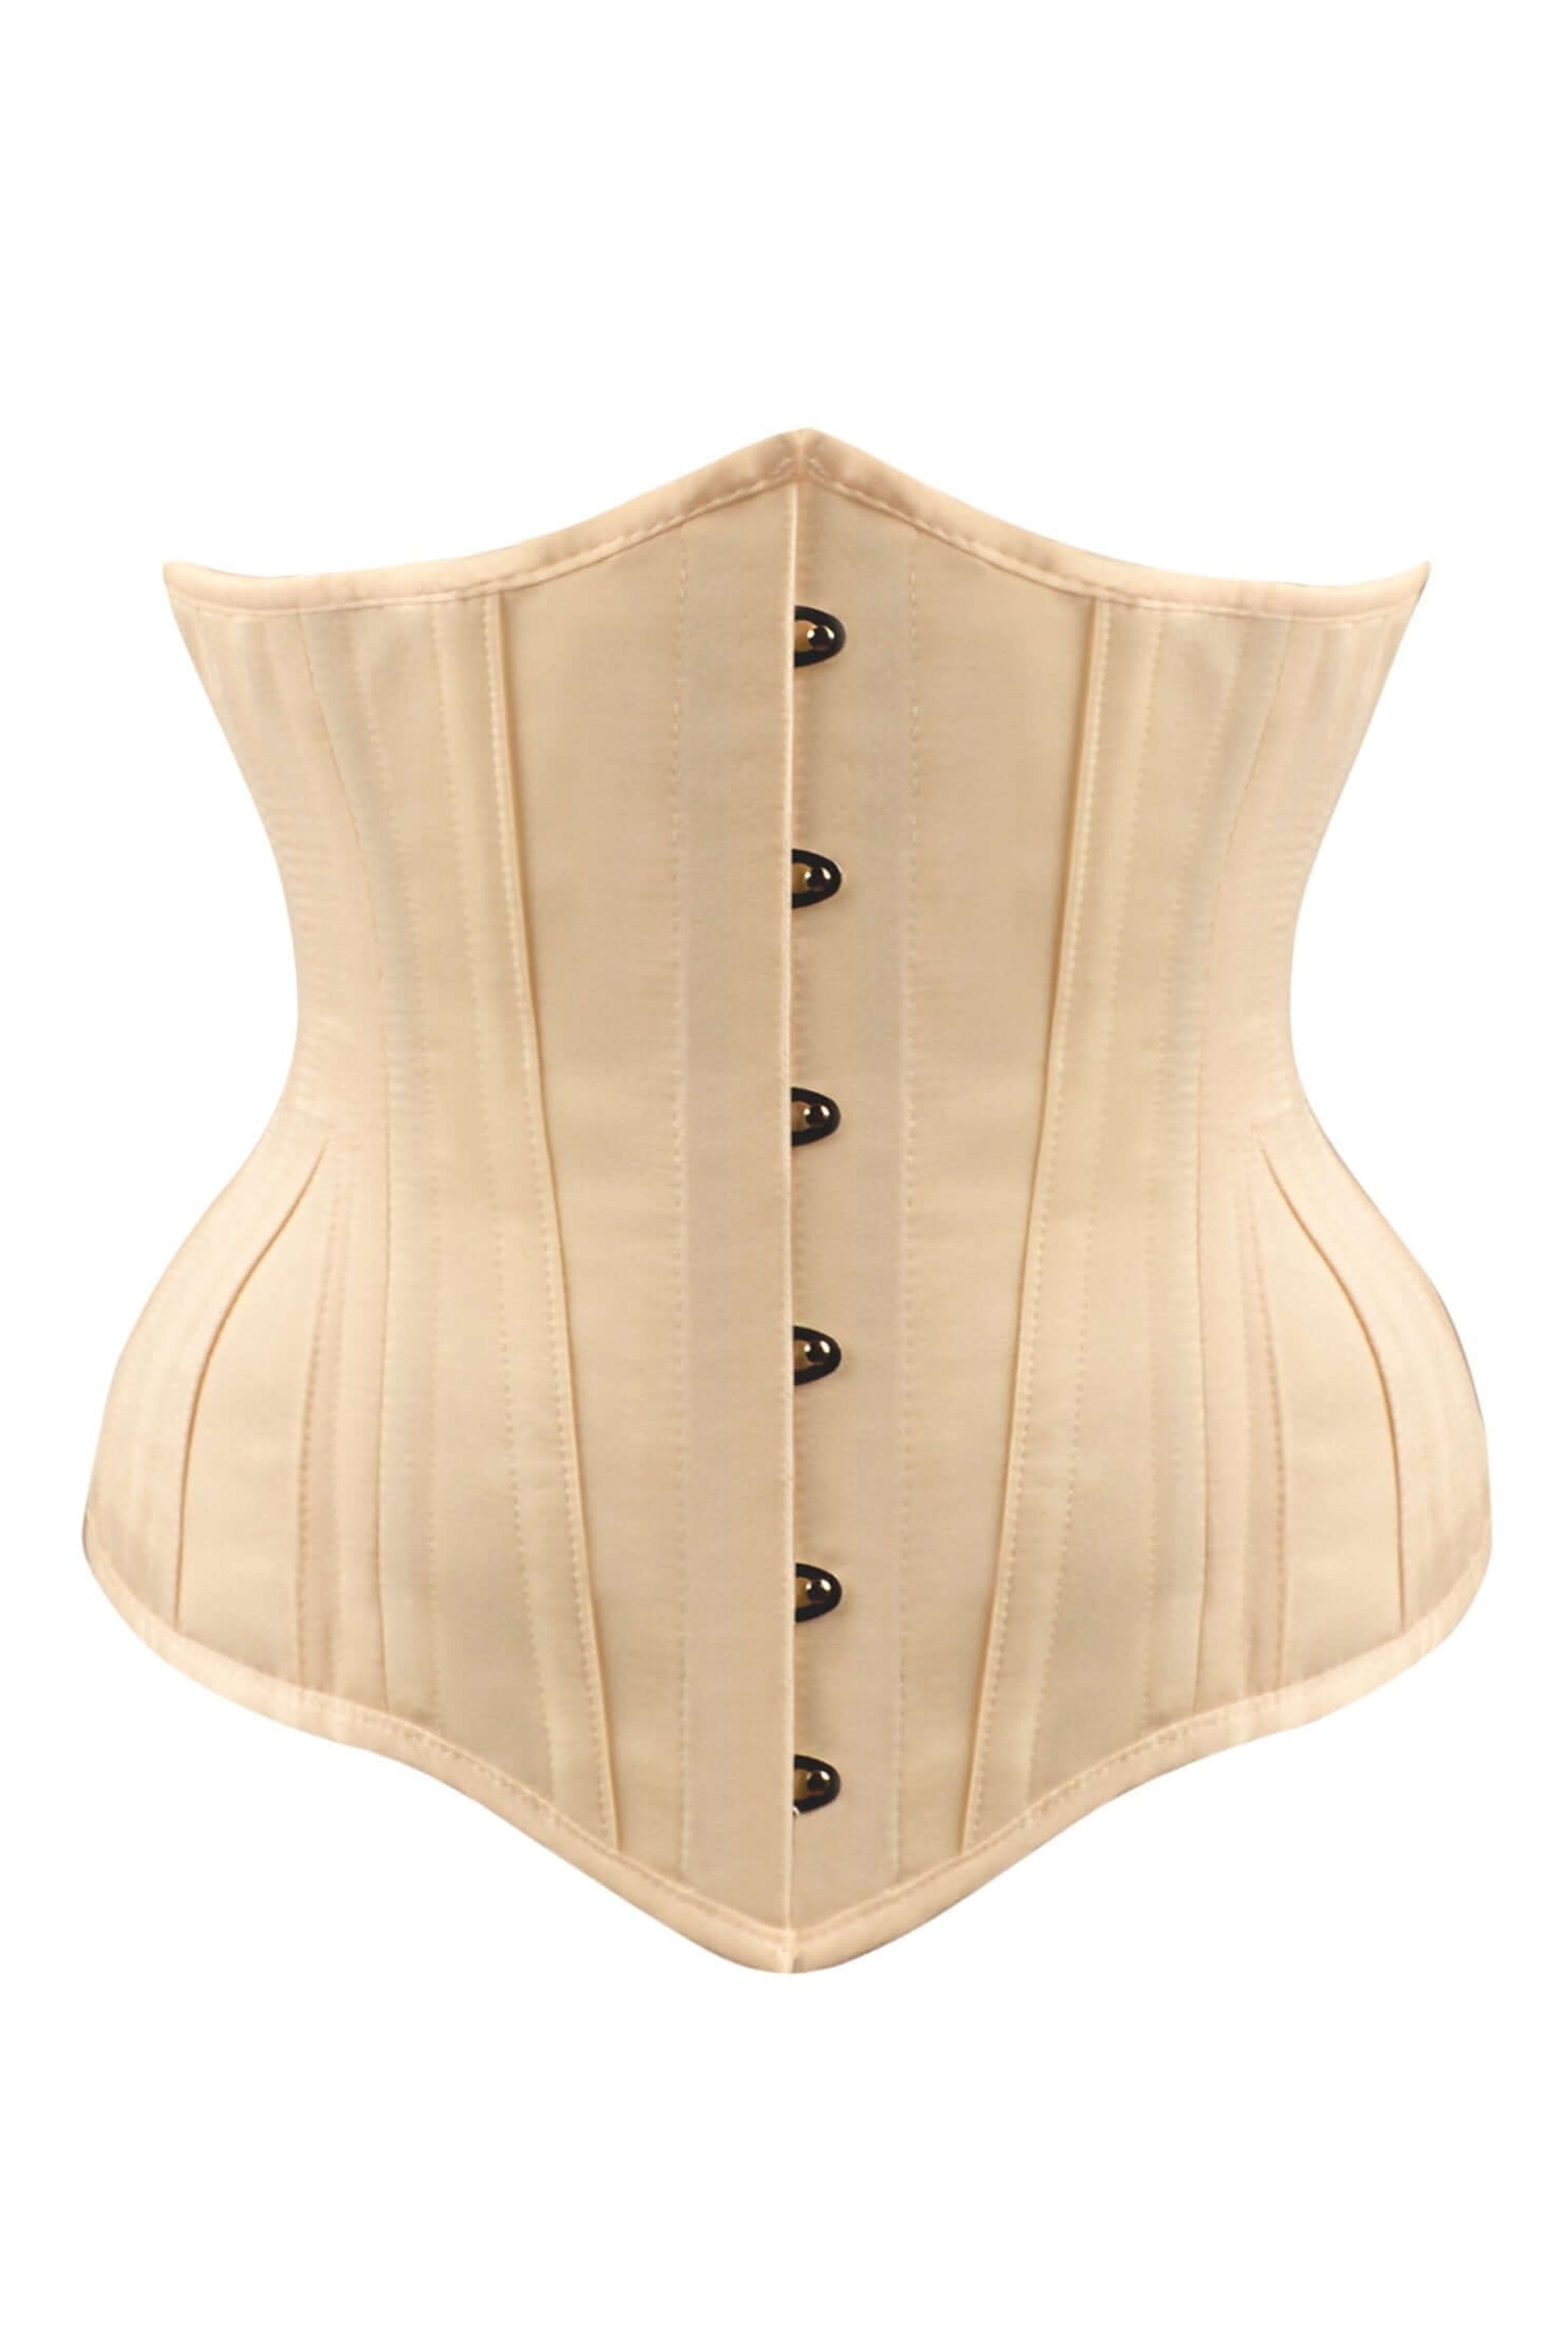 How to cut and sew an under-bust corset belt with a basque waistline